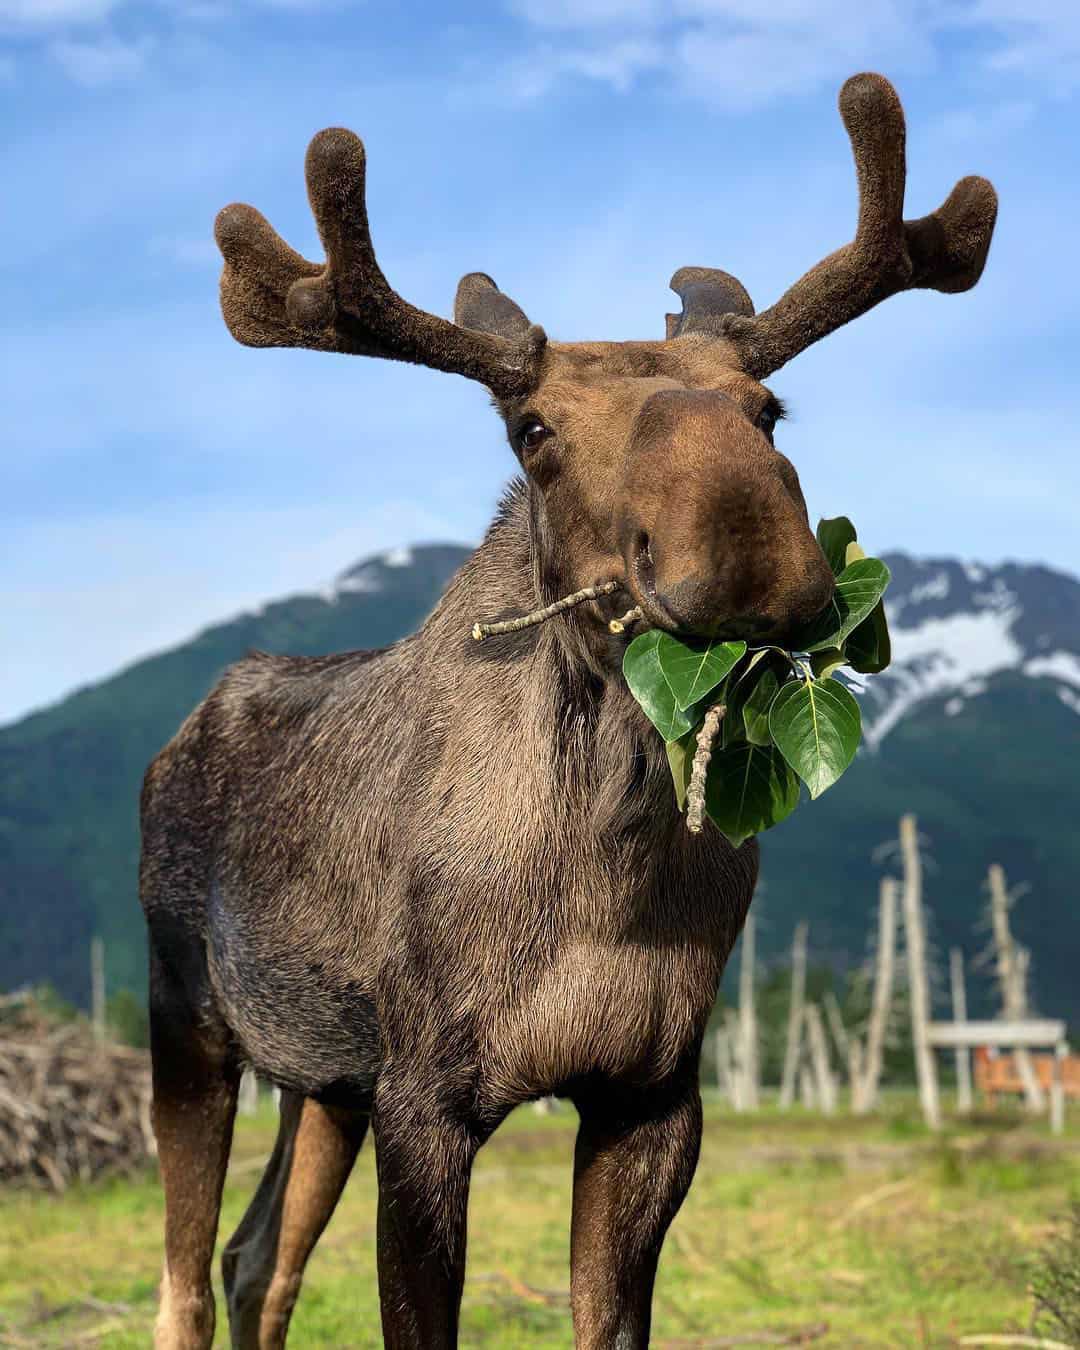 A photo of Arnold the moose chewing on some leaves